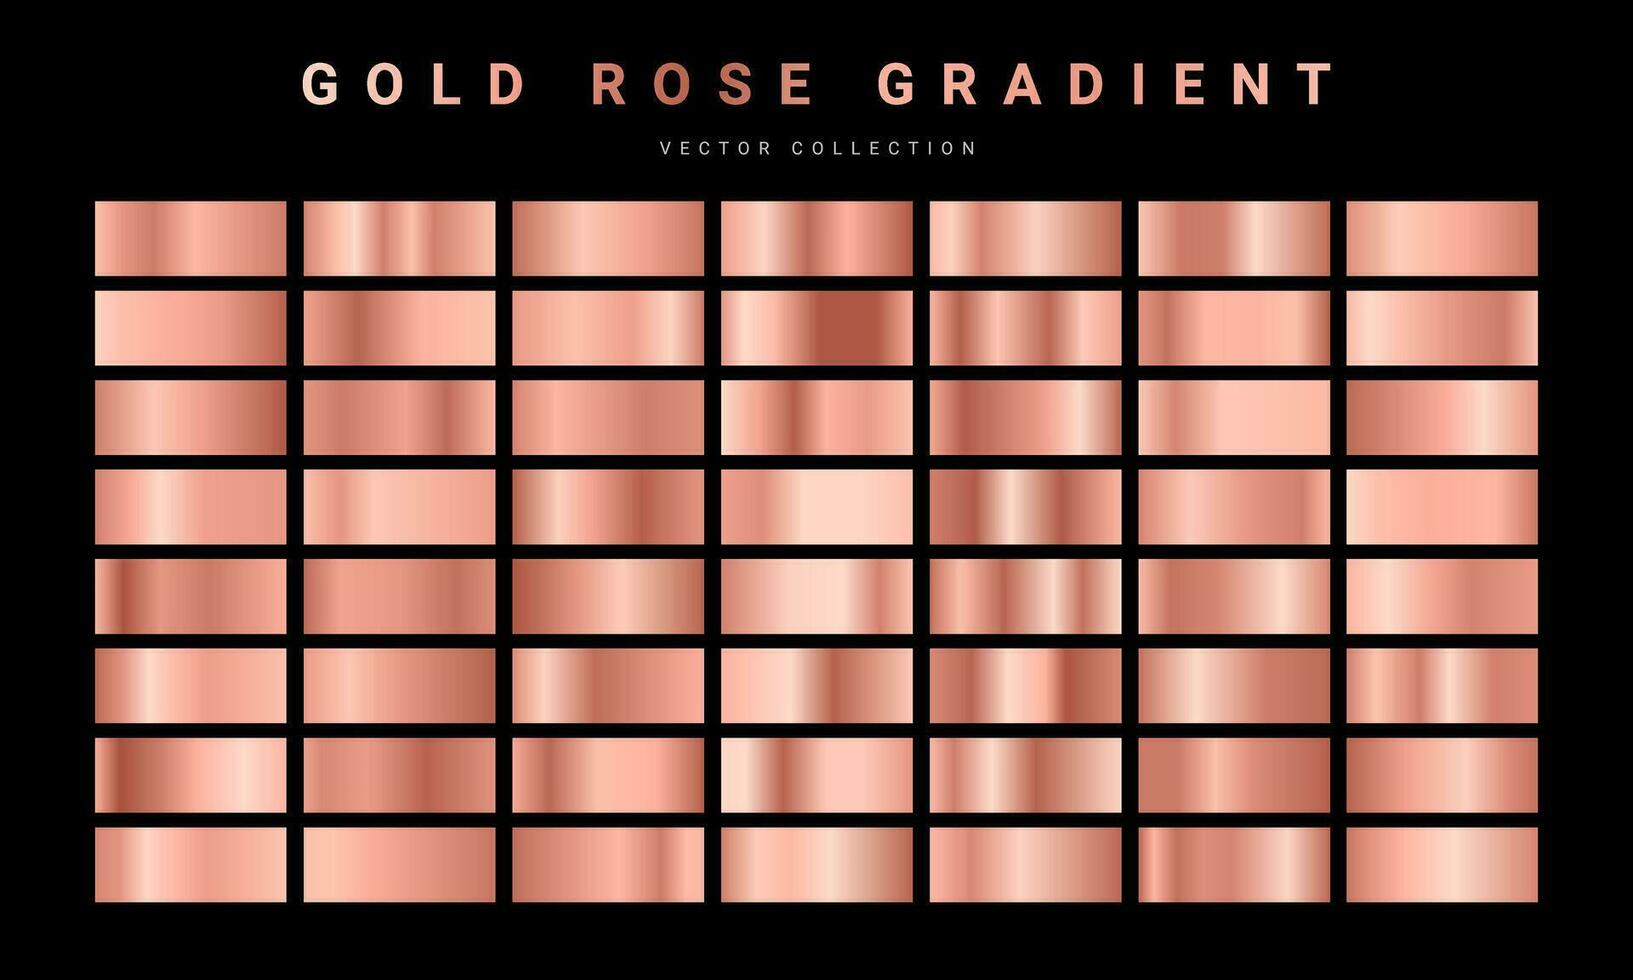 Set of gold rose foil texture. Collection of pink postel gradients isolated on black background. Vector illustration